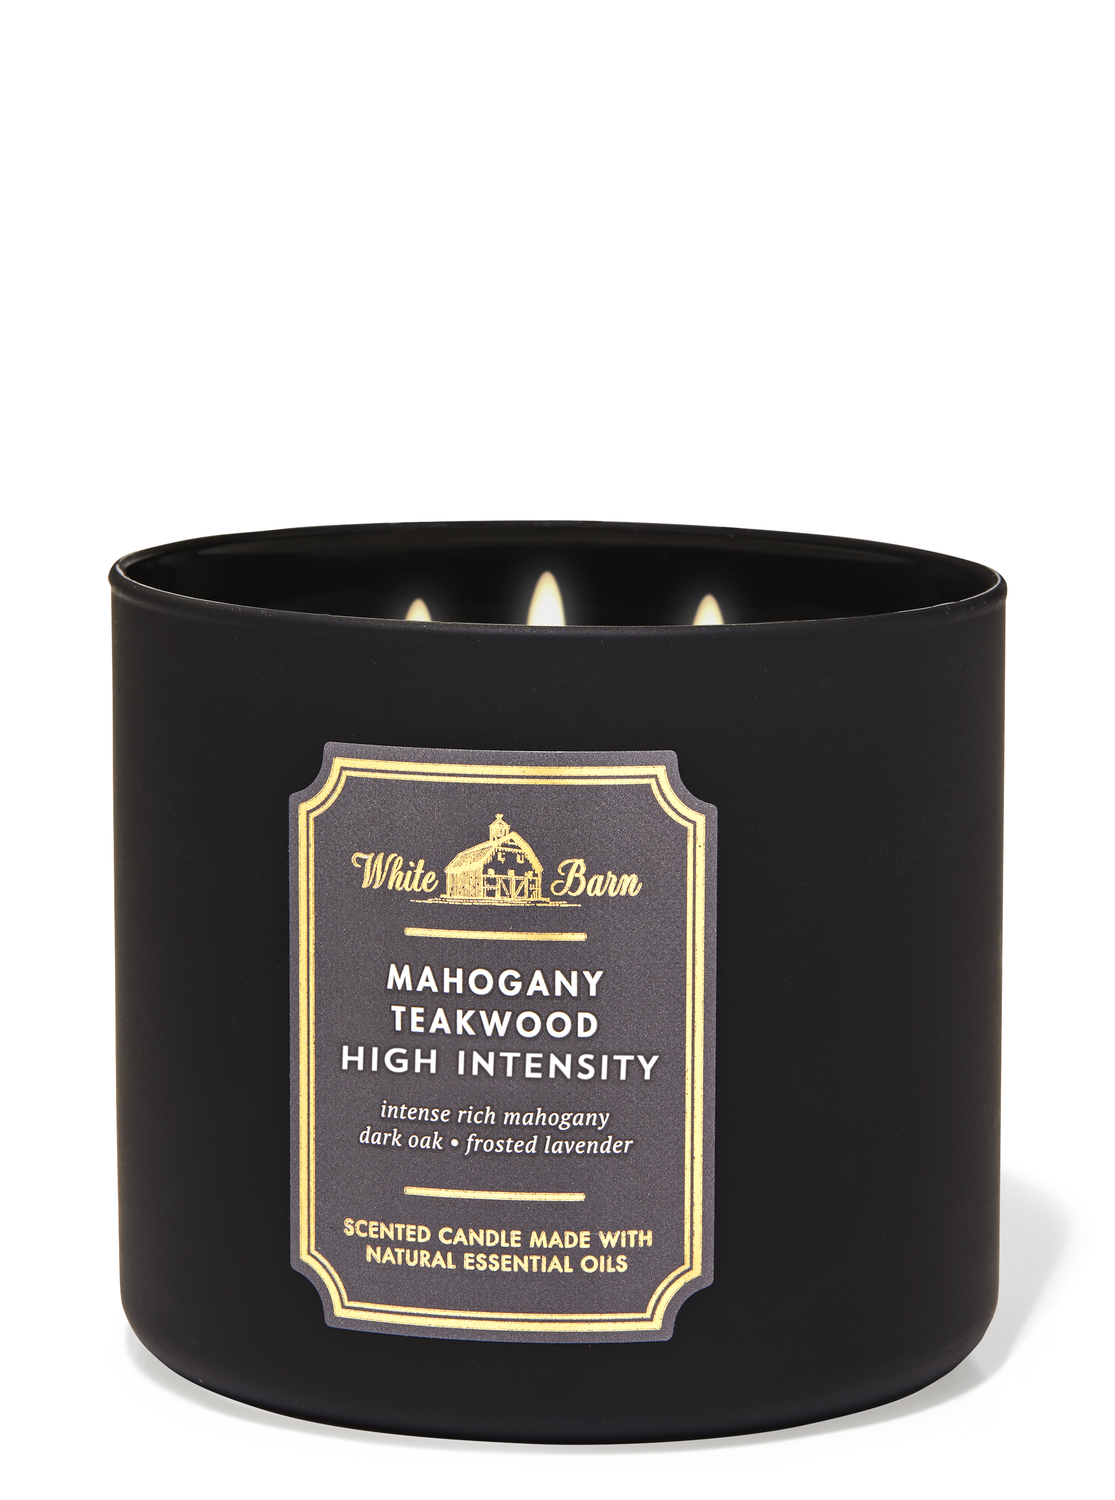 3 wick candles from Bath and Body works for sale